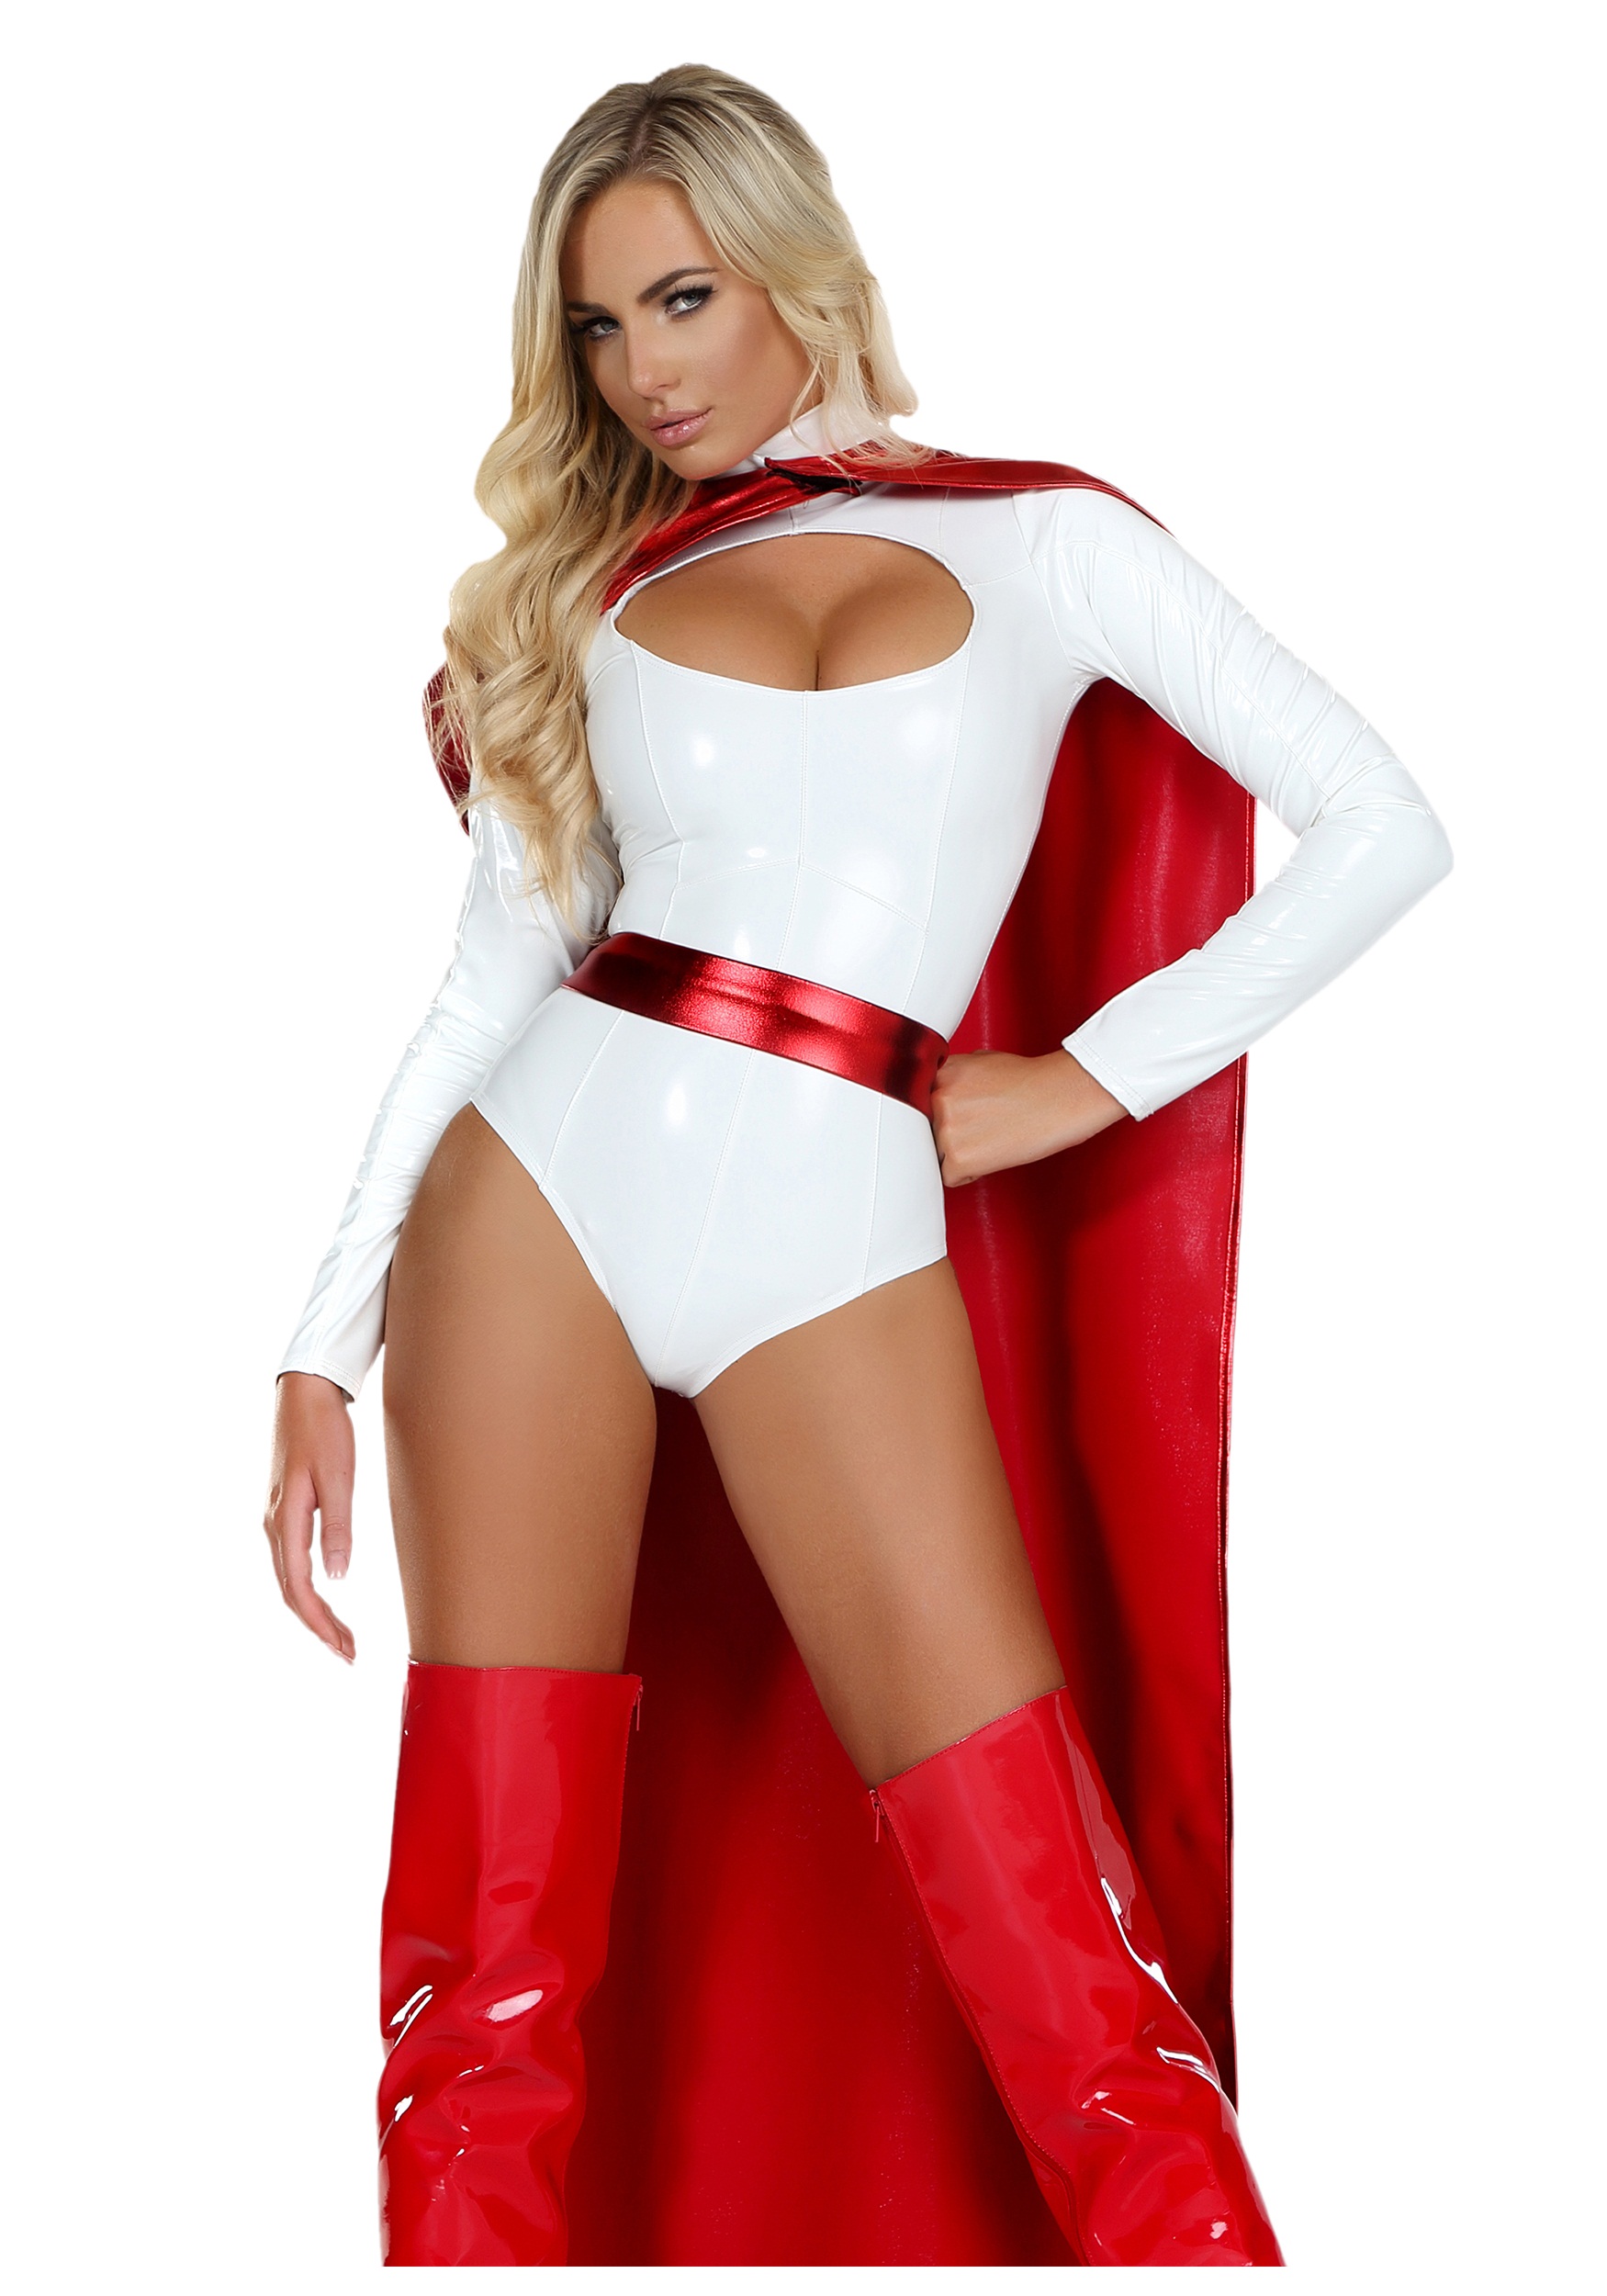 The Sexiest Female Superhero Costumes for Adults